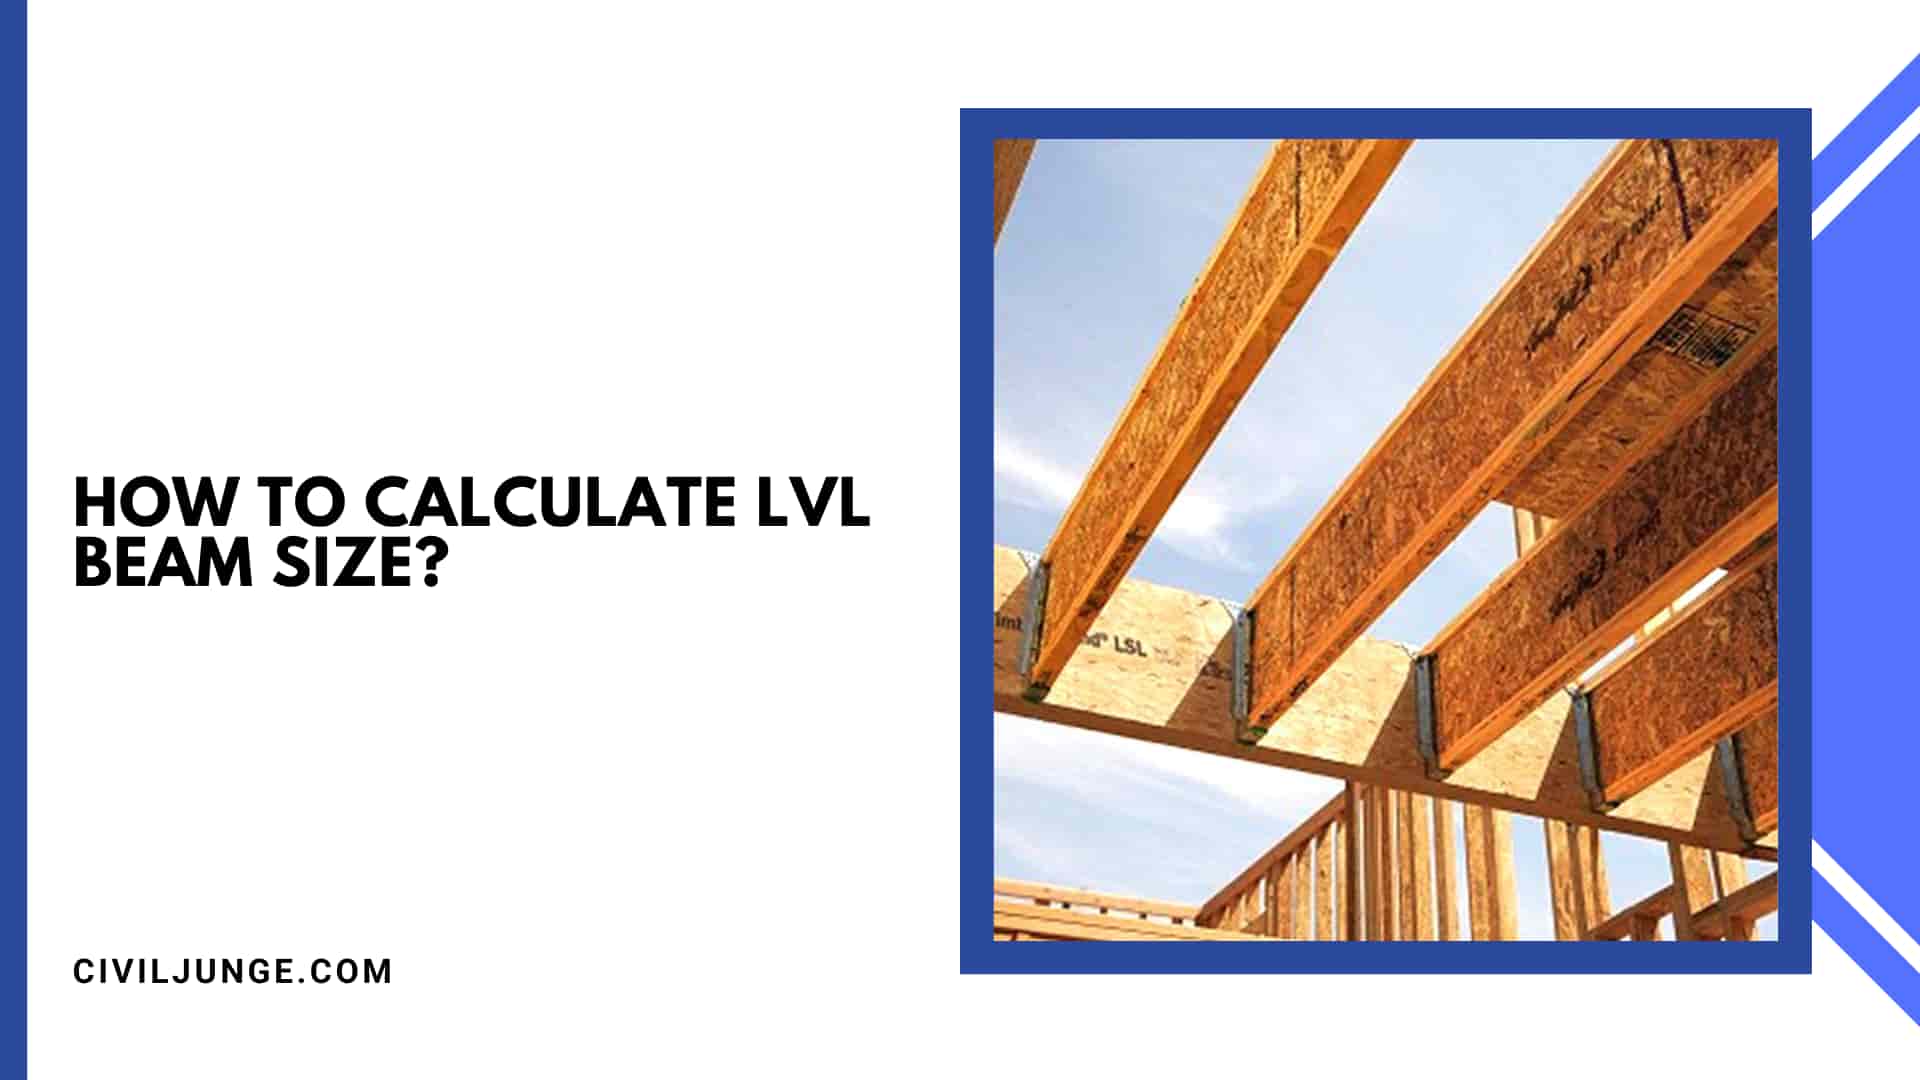 How to Calculate Lvl Beam Size?